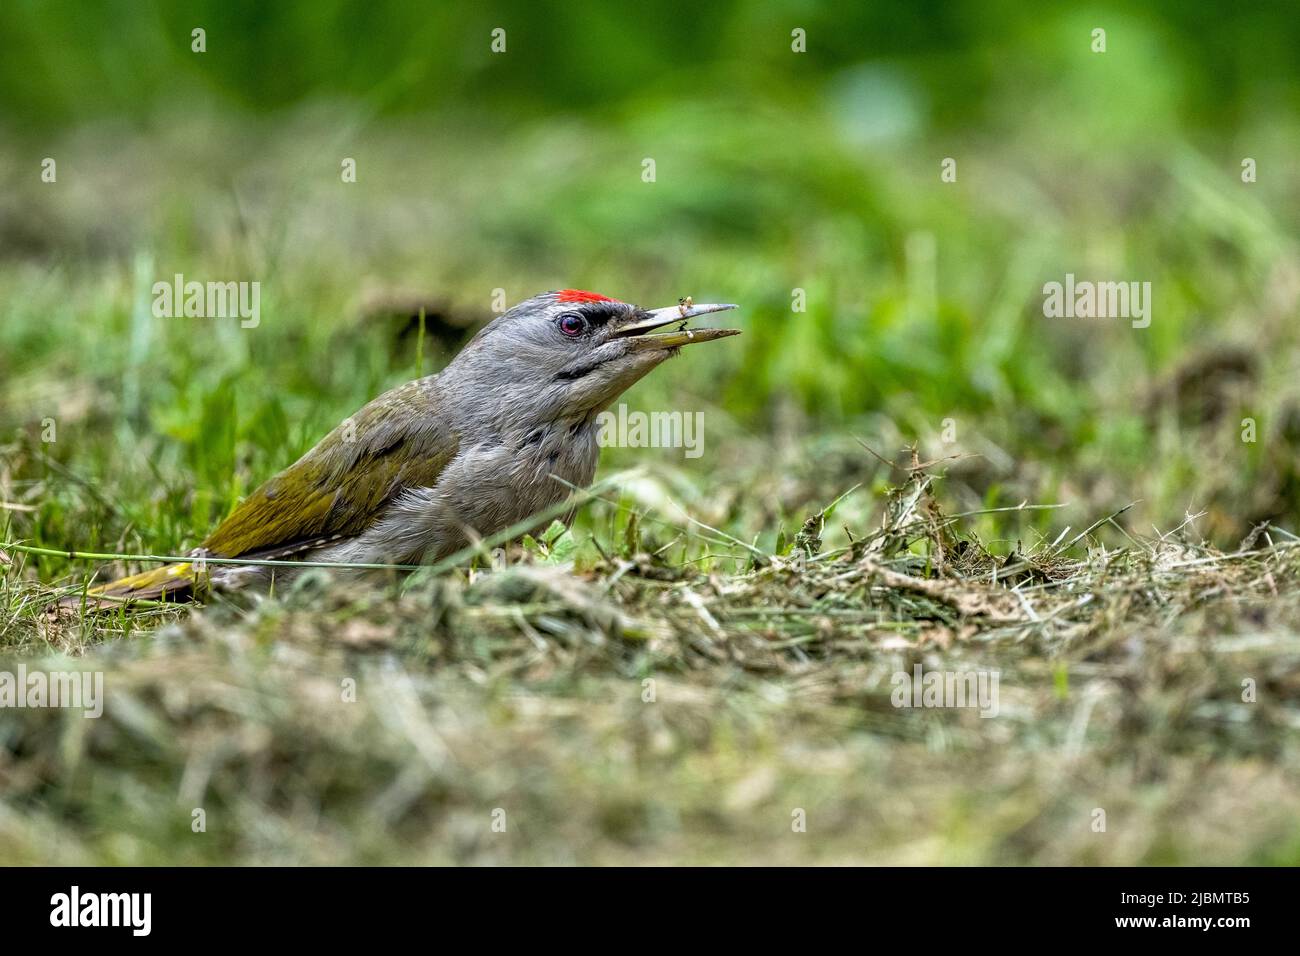 A woodpecker feeding in an anthill. Grey-headed woodpecker, Picus canus. Stock Photo